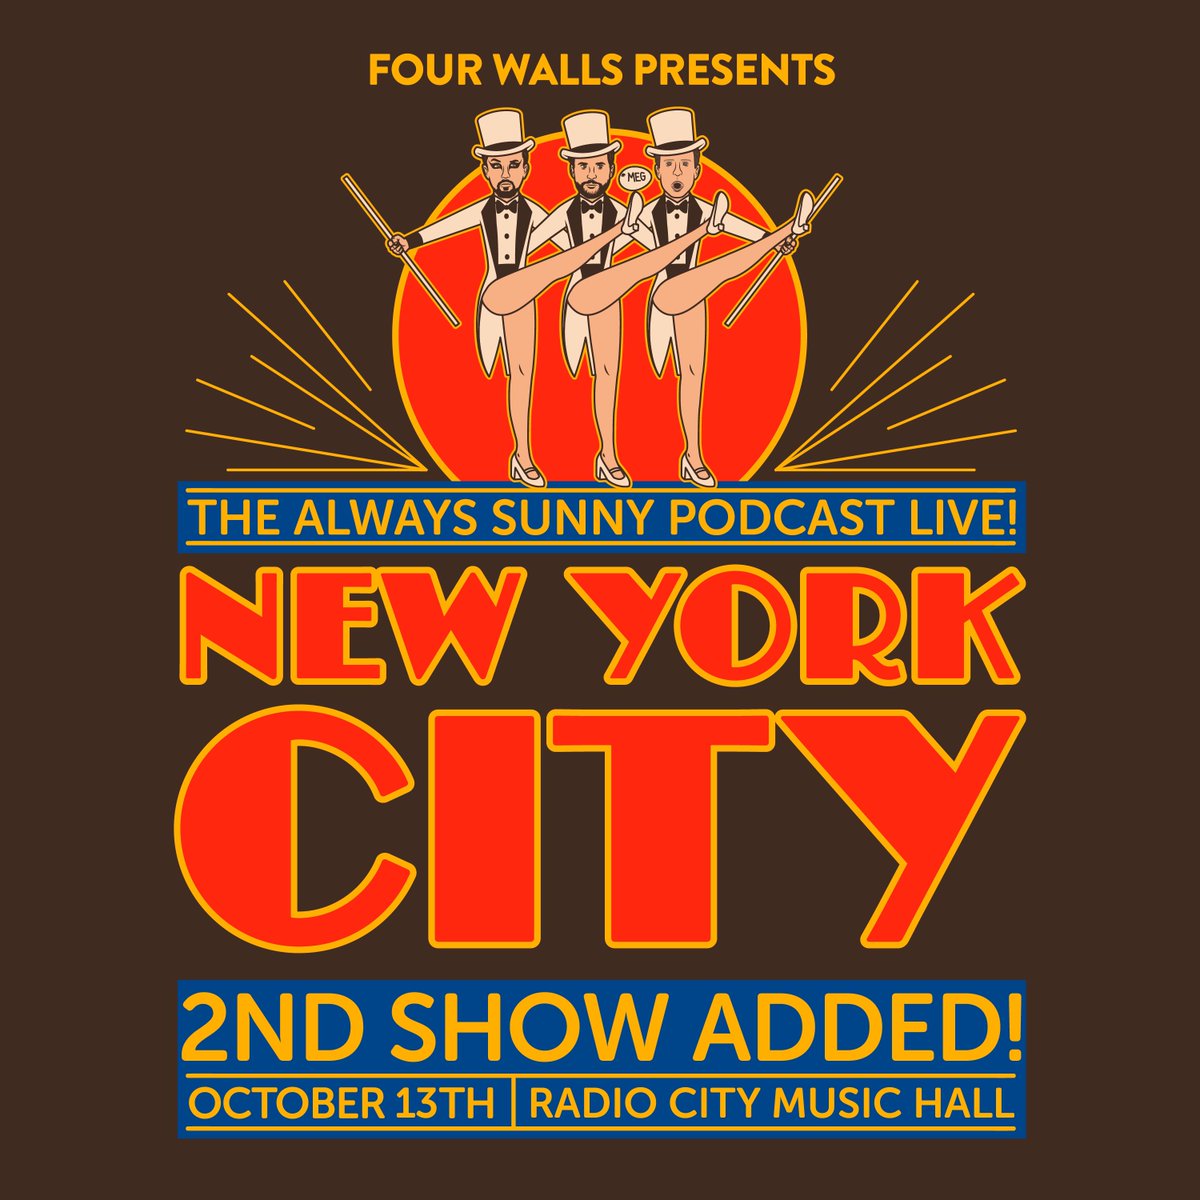 NYC! PRE-SALE IS NOW LIVE for our added show at Radio City Music Hall on Oct 13! Use Code: “SUNNY”. Tix & info at TheAlwaysSunnyPod.com. Get ‘em before they’re gone! See ya there, creeps! ☀️🎧 #thesunnypodcast #live #nyc #charlieday @RMcElhenney @GlennHowerton @meganganz